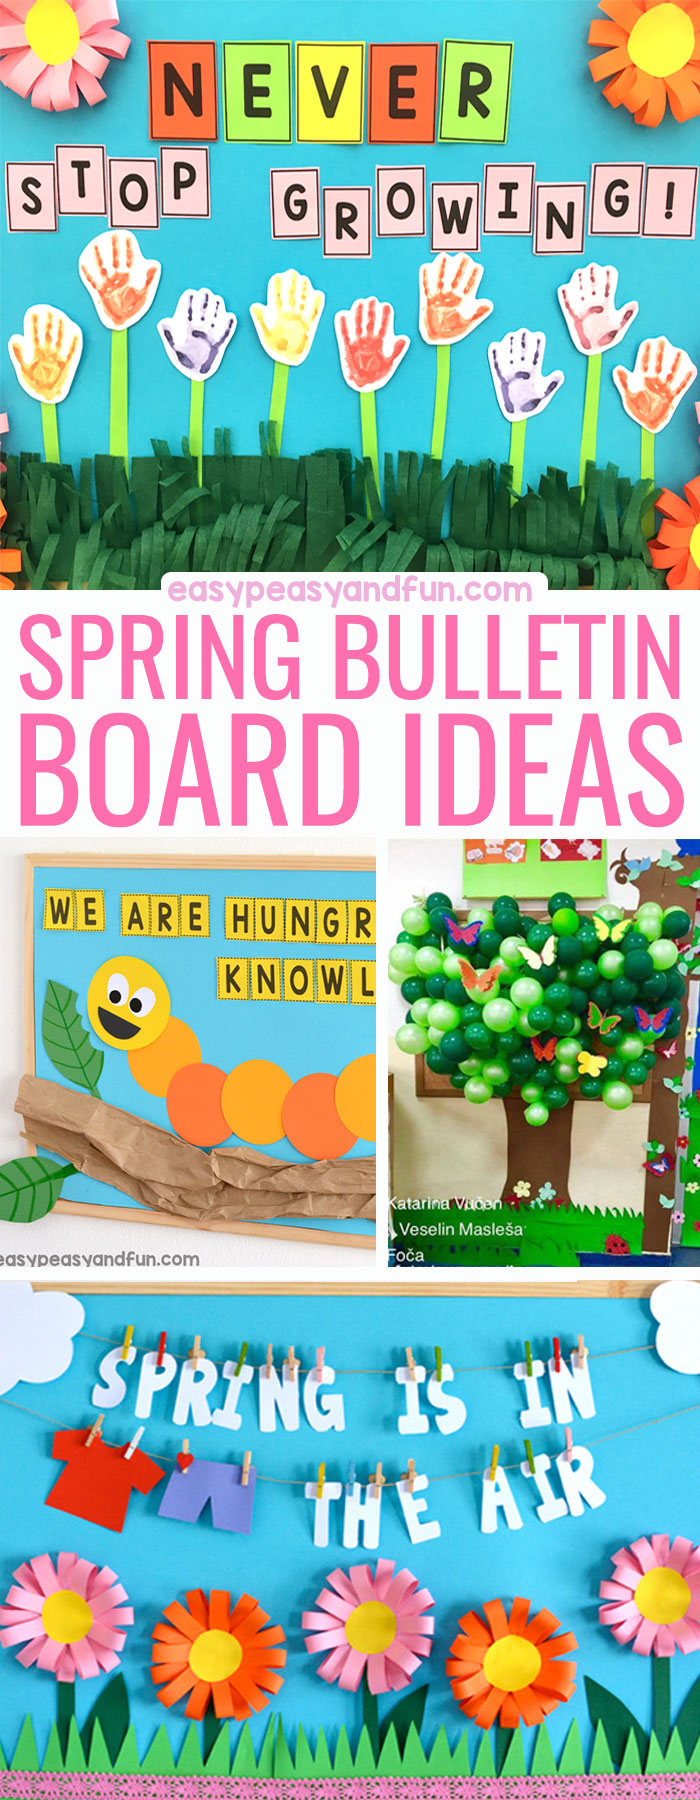 Cool spring bulletin board ideas for the classroom